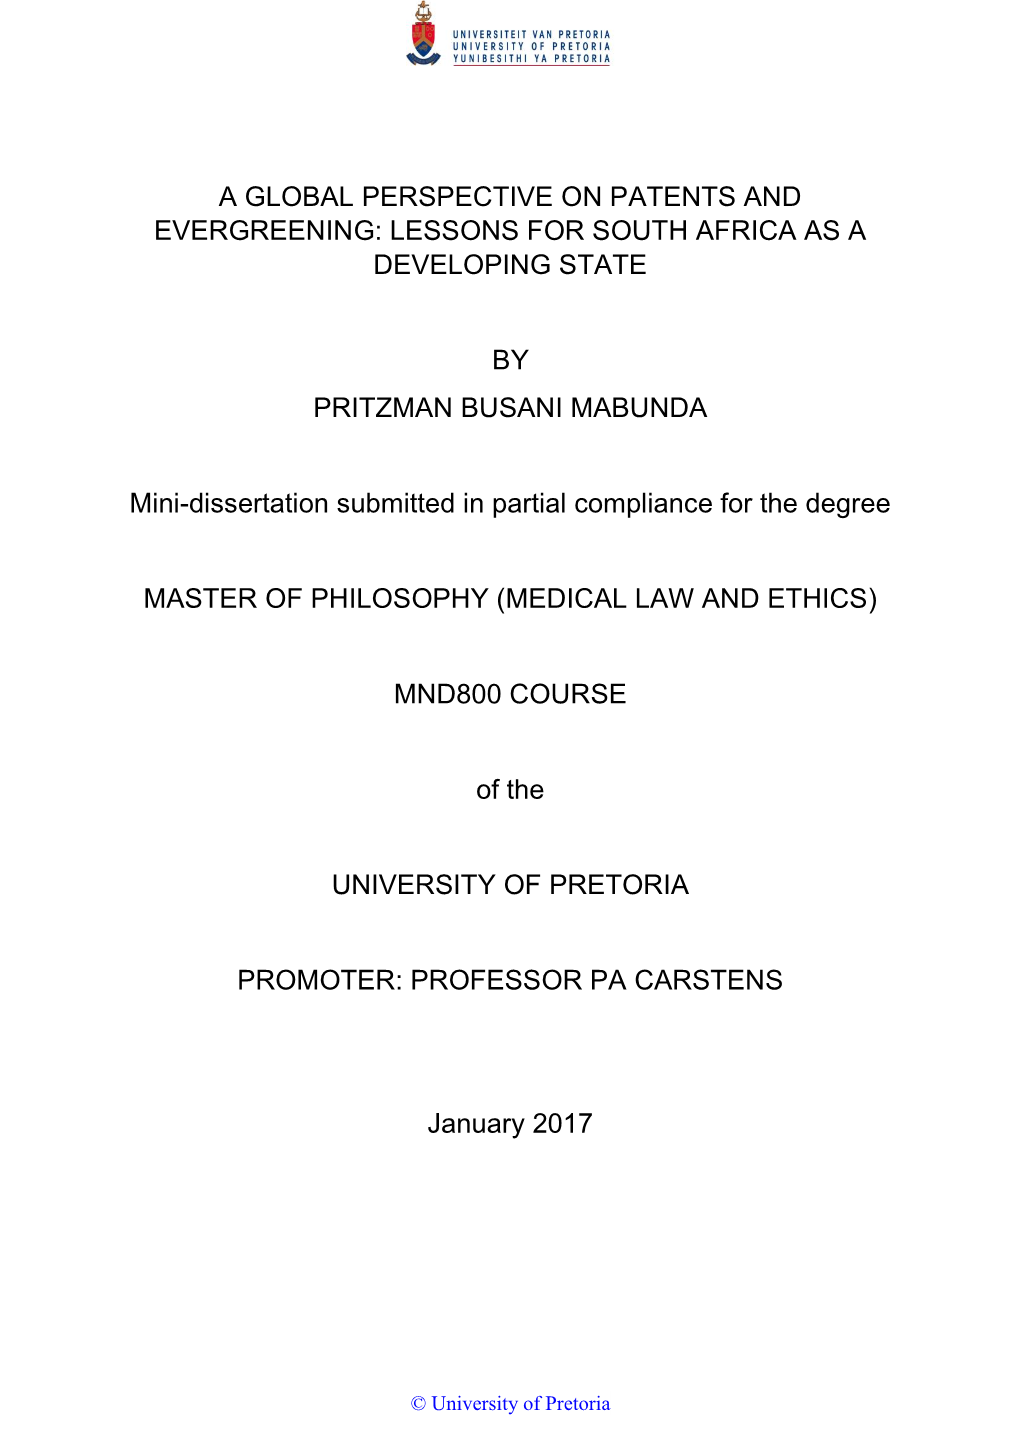 A Global Perspective on Patents and Evergreening: Lessons for South Africa As A